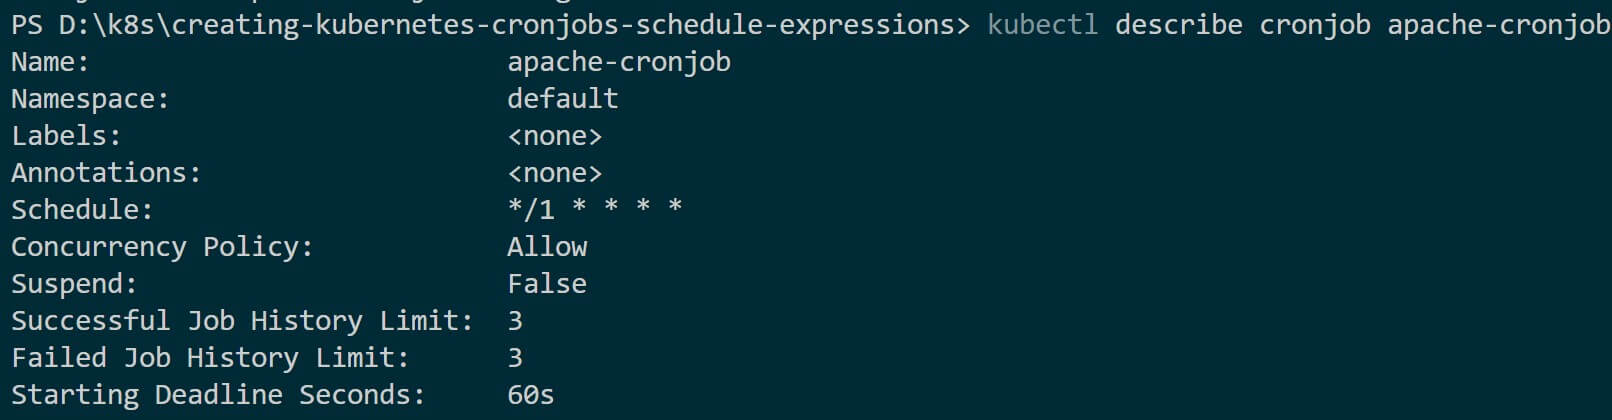 Creating Kubernetes k8s Cronjob Schedule Expression Example